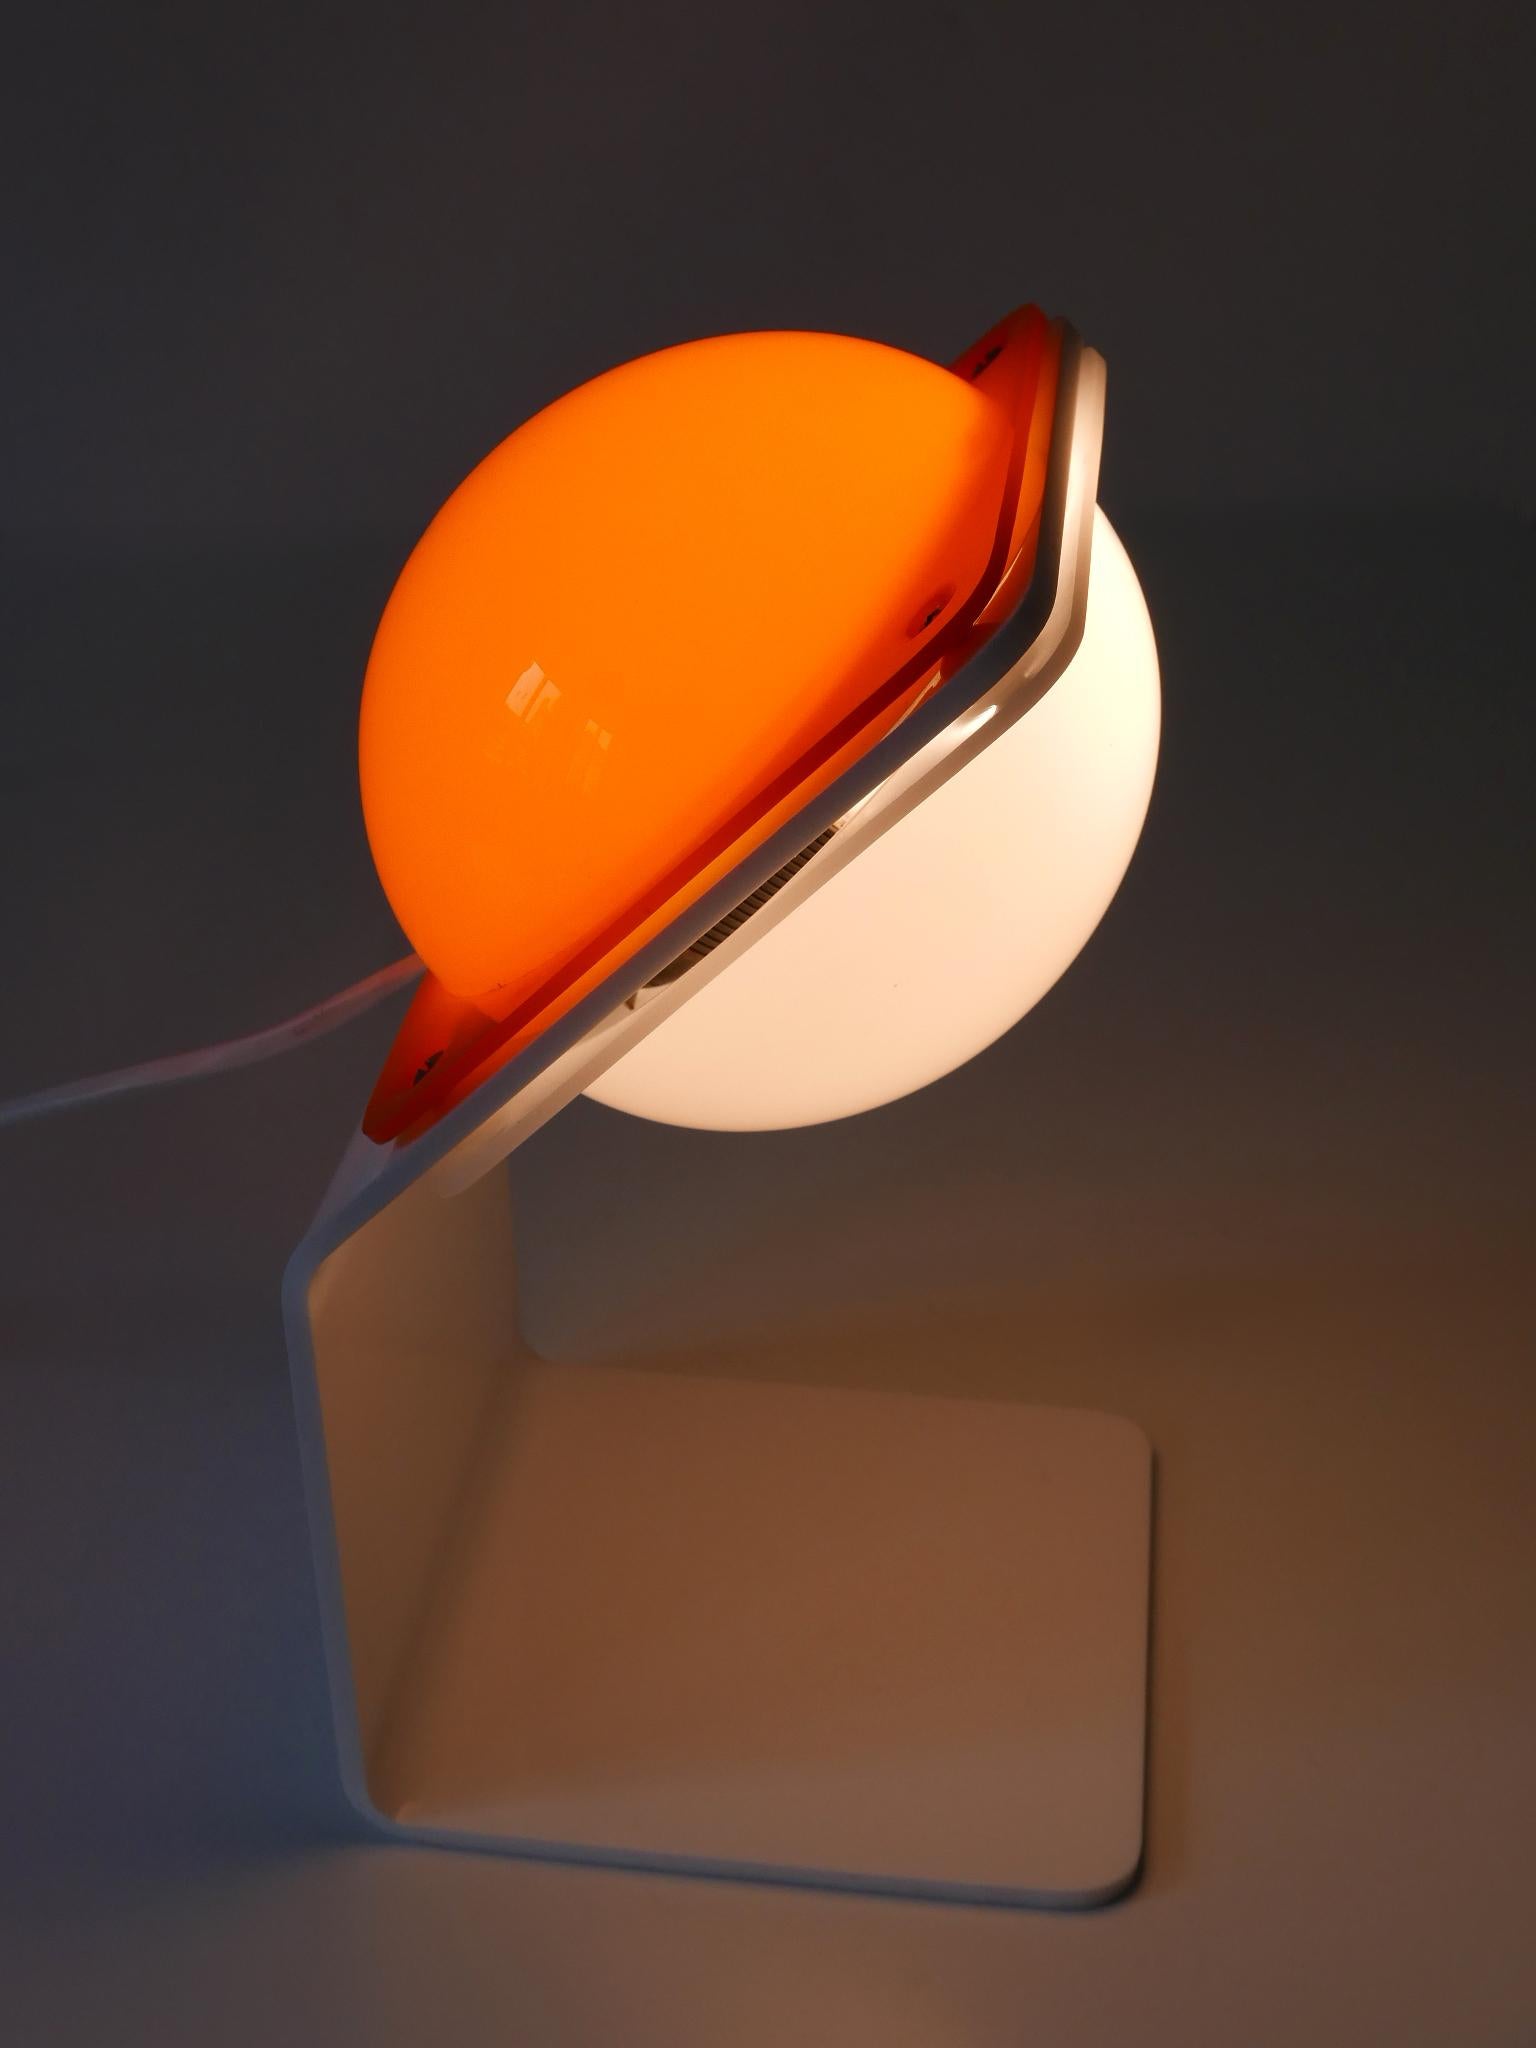 Extremely rare, elegant and highly decorative Mid-Century Modern lucite table lamp. Designed and manufactured by Harvey Guzzini, Italy, 1970s.

Executed in white and orange lucite, the lamp comes with 1 x E14 / E12 Edison screw fit bulb socket, is